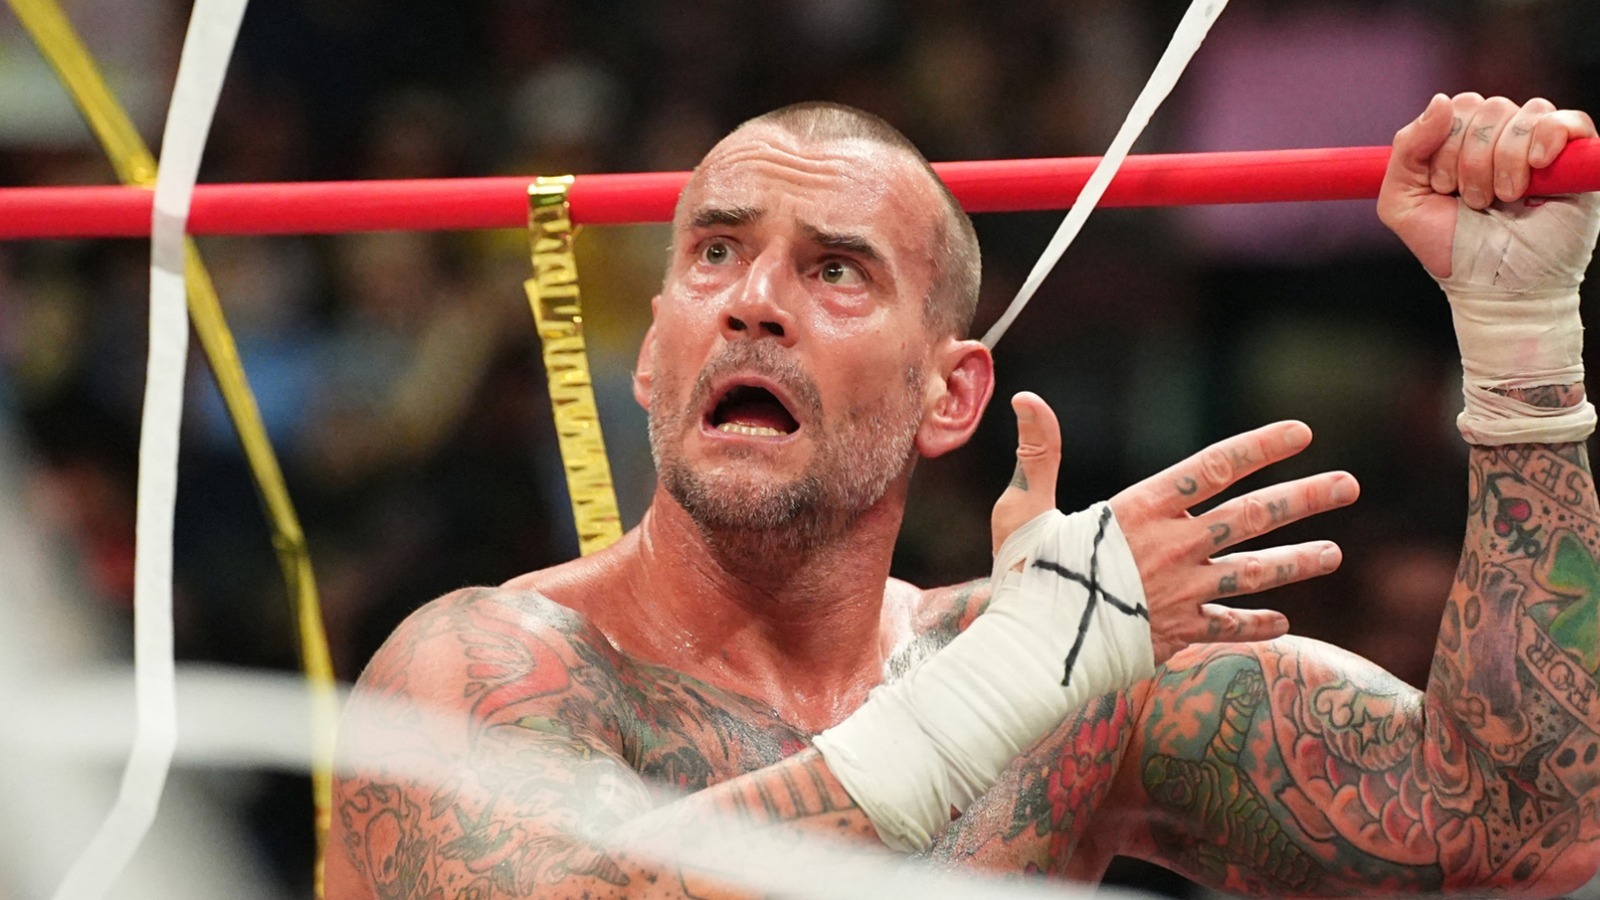 Details On Reported AEW Collision Incident Backstage Involving Jack Perry, CM Punk